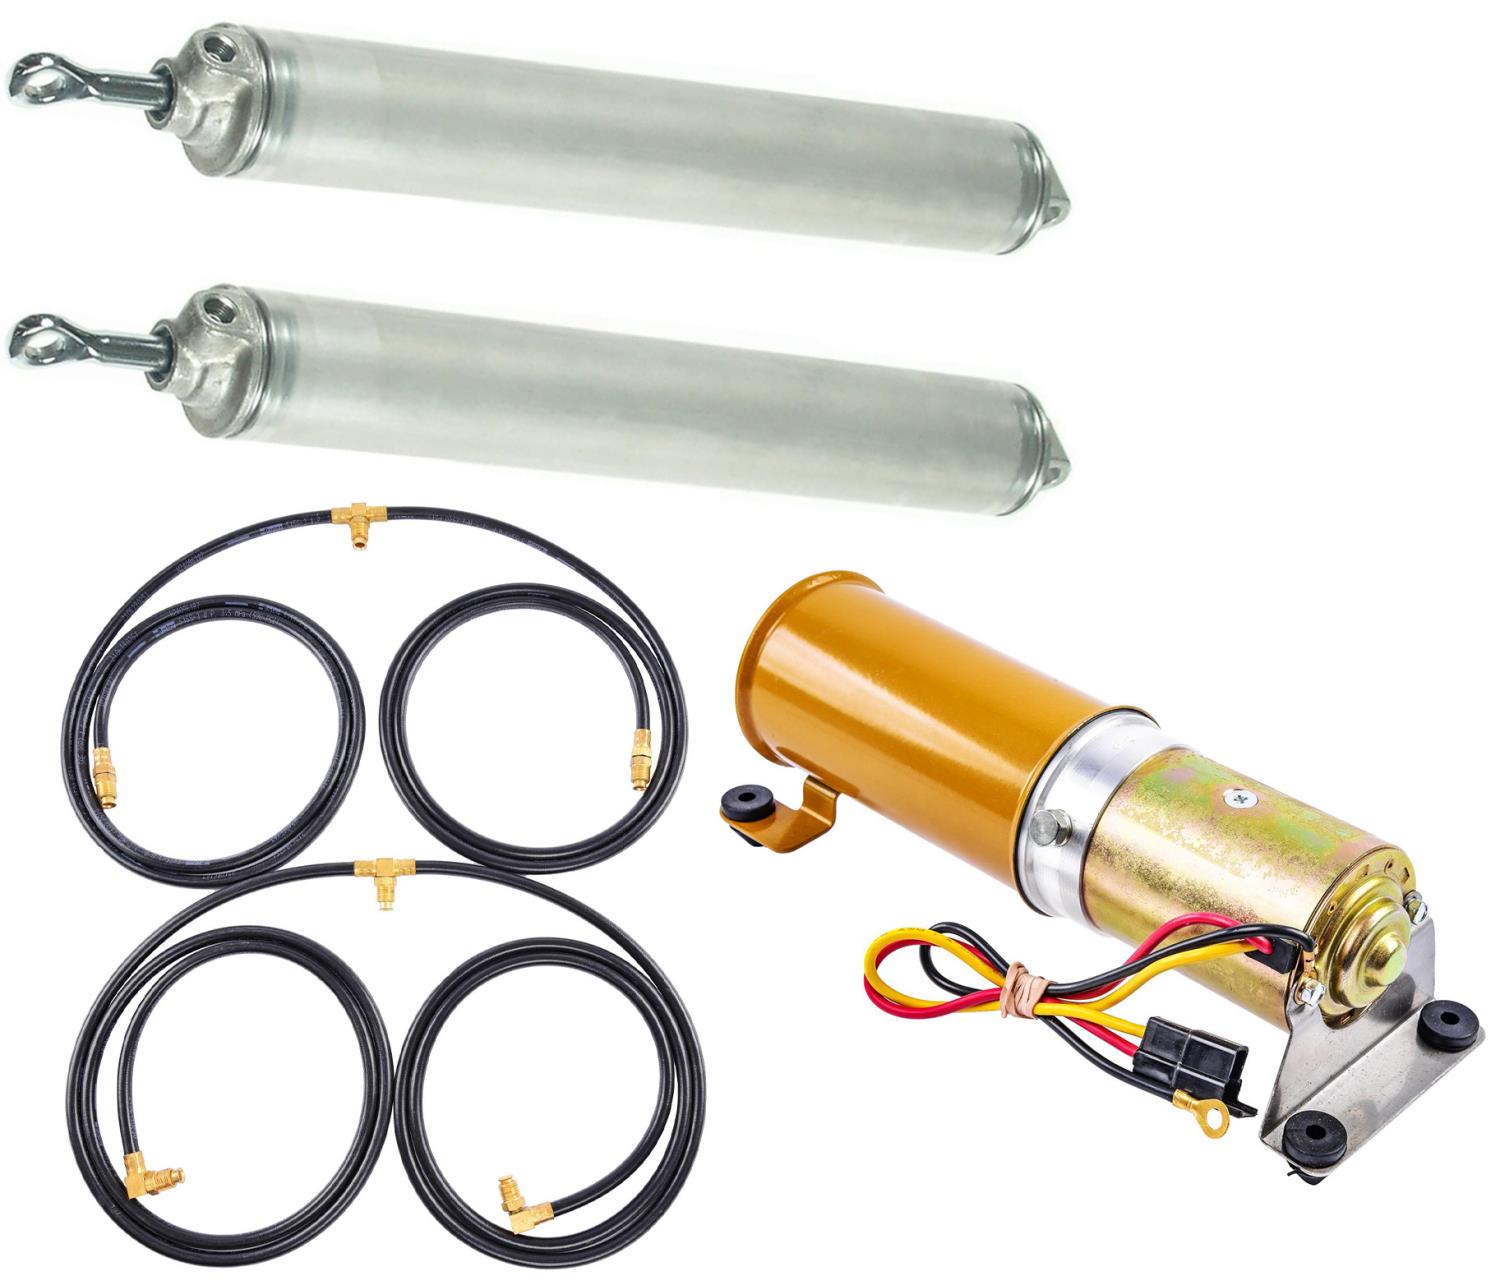 Convertible Top Cylinder, Motor & Hose Kit for 1961 Buick, Cadillac, Chevy, Oldsmobile, Pontiac Convertibles [Sold as a Kit]